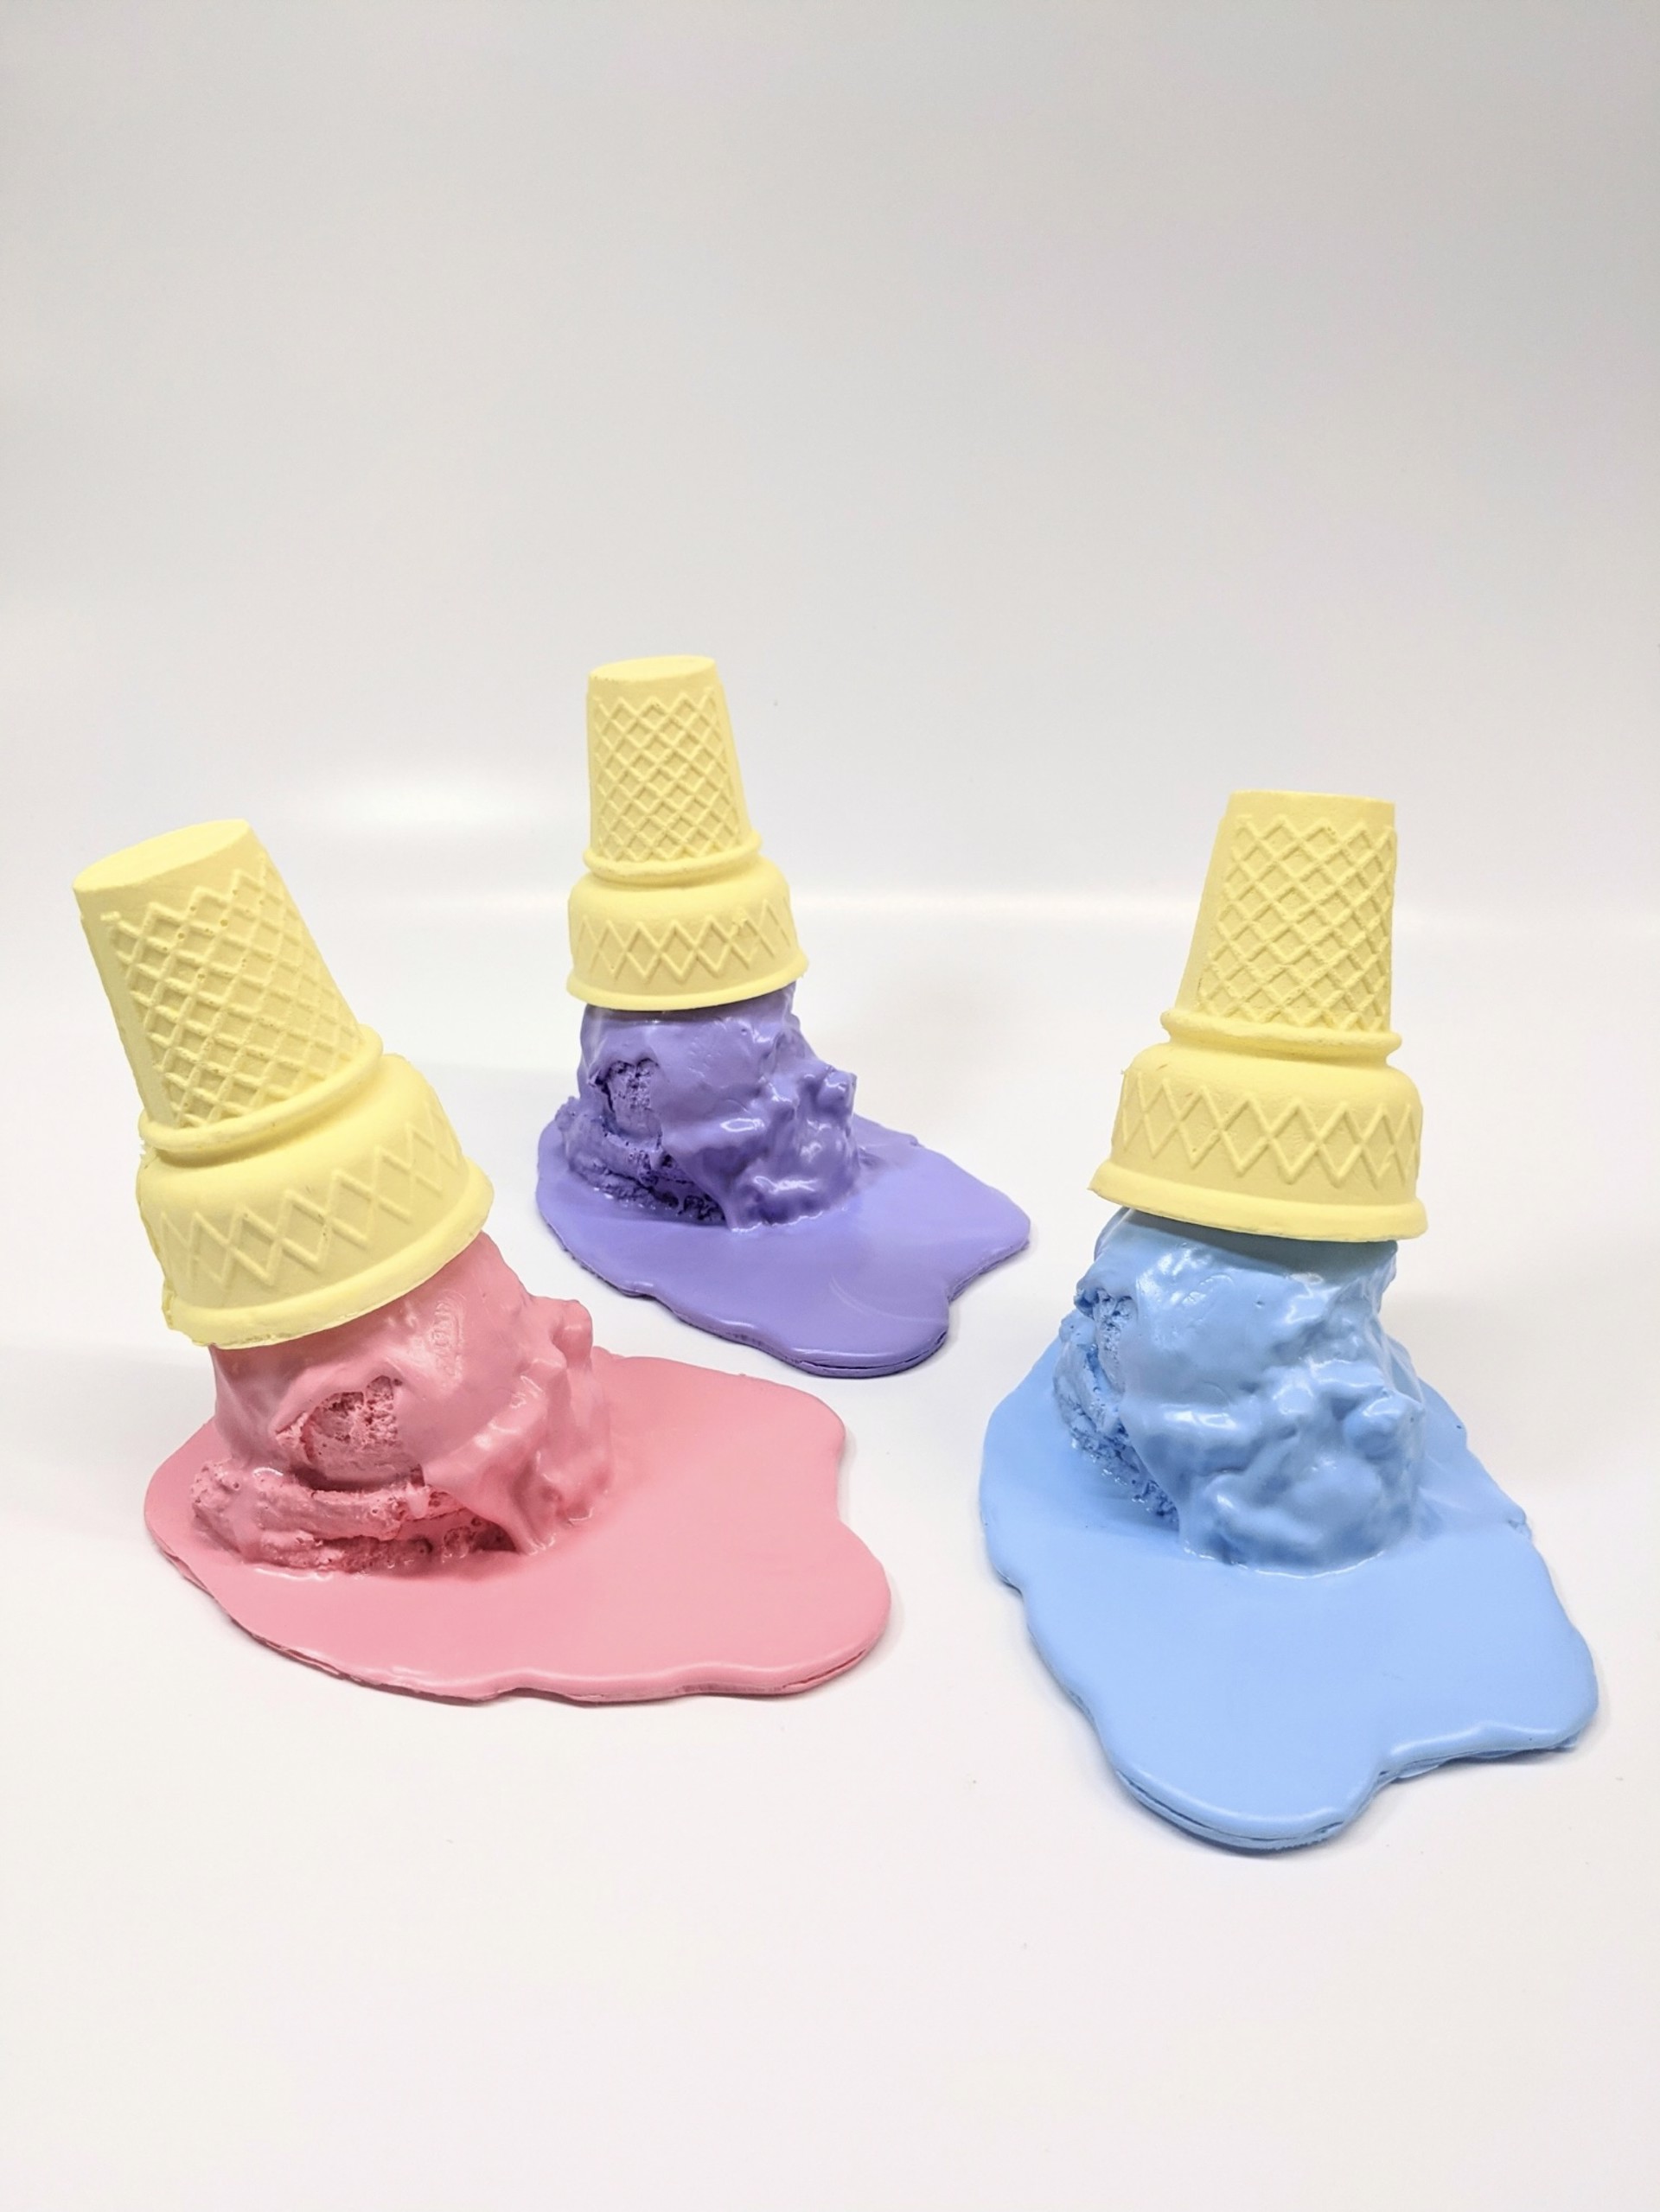 Melty Puddle Scoop Flat Cone #2 by Jourdan Joly